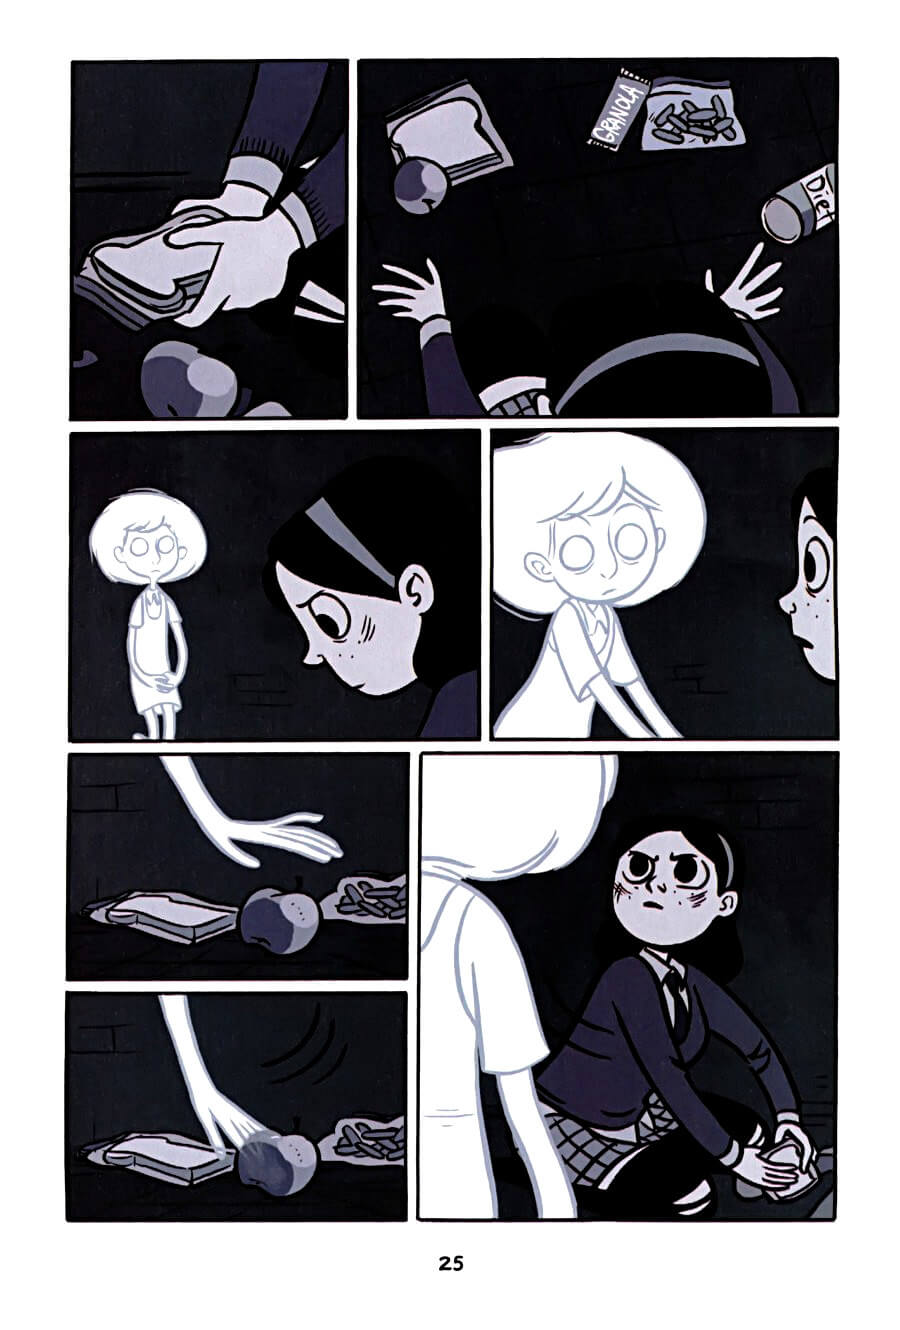 page 25 of anya's ghost graphic novel